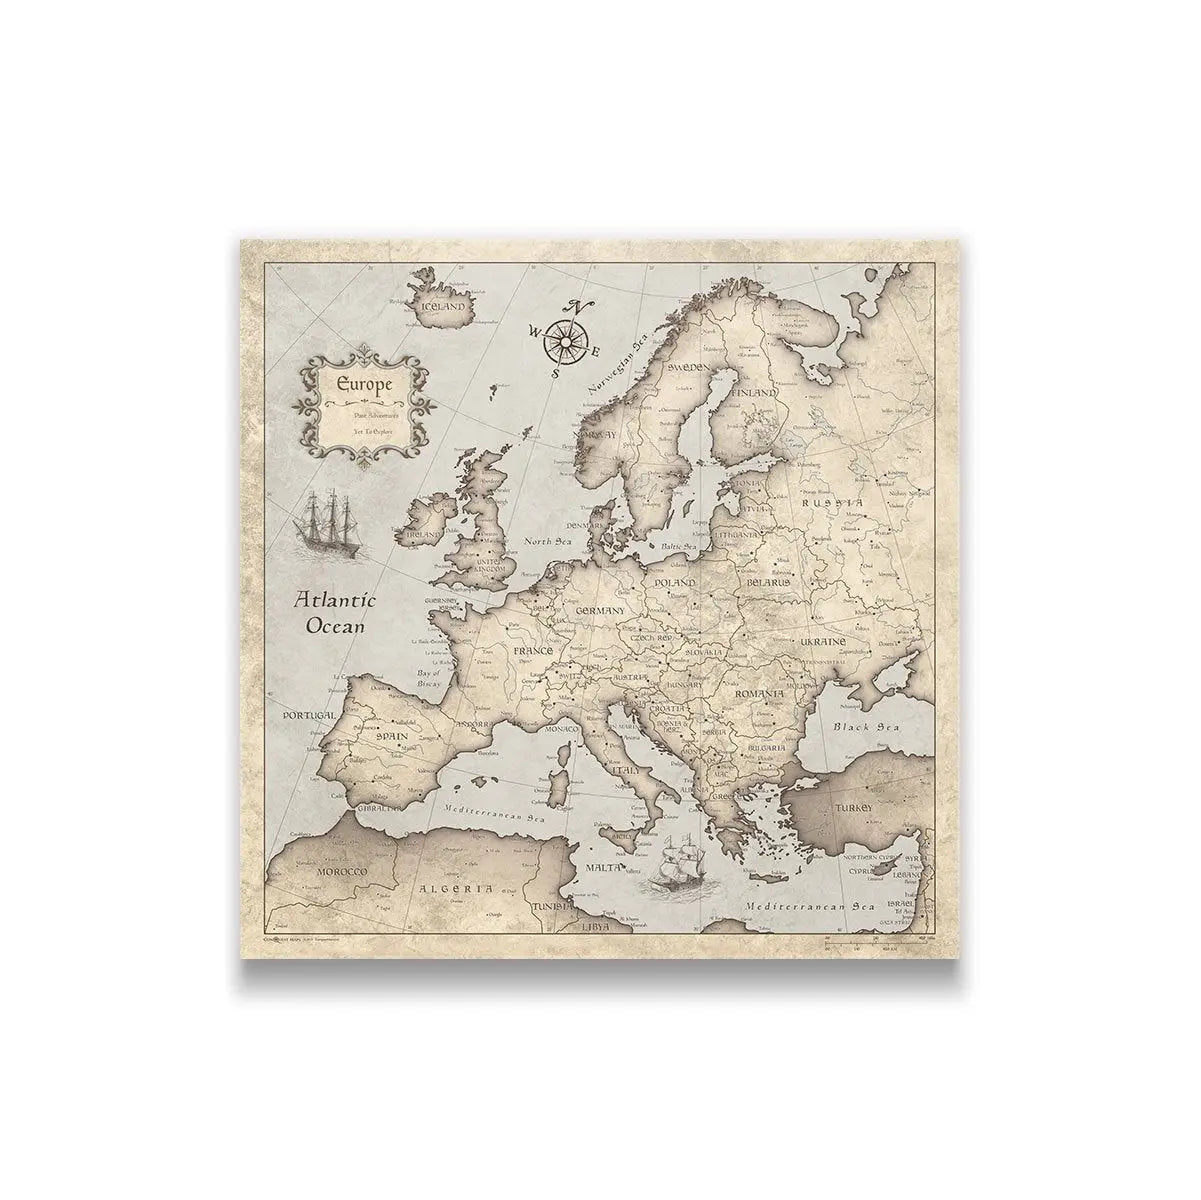 Continent Wall Maps For All Your Travels